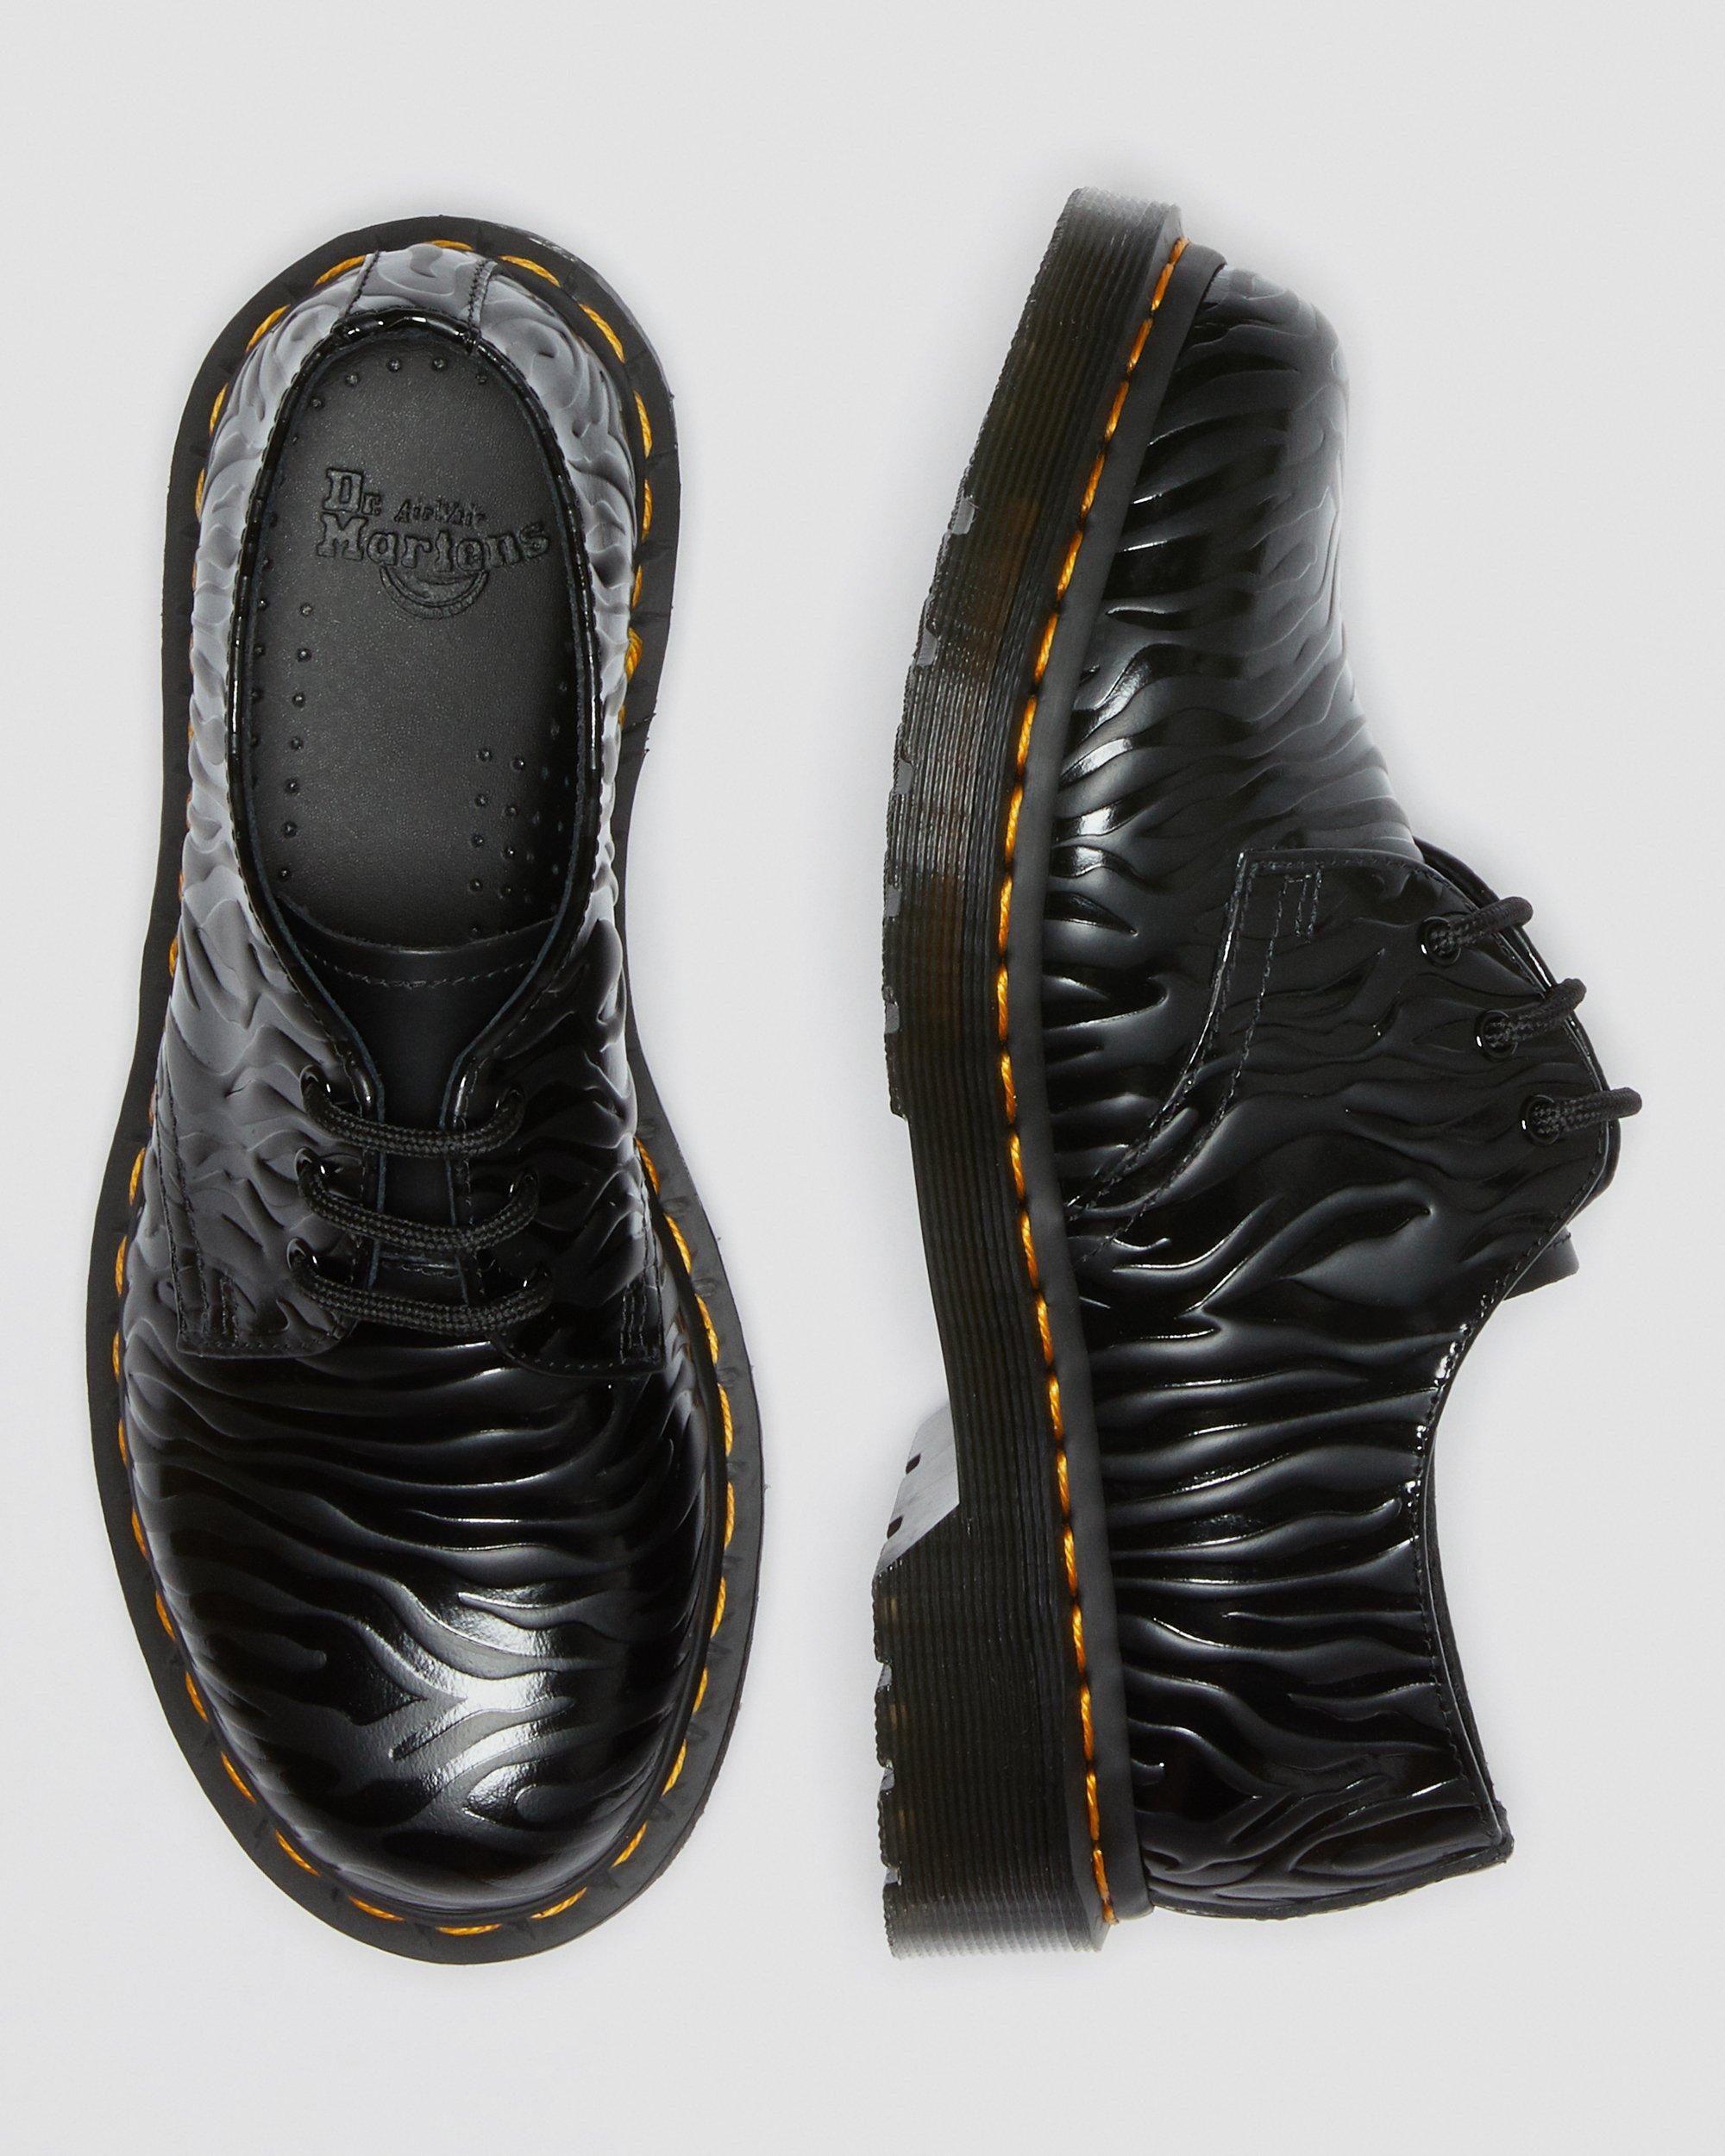 DR MARTENS 1461 Zebra Emboss Smooth Leather Oxford Shoes